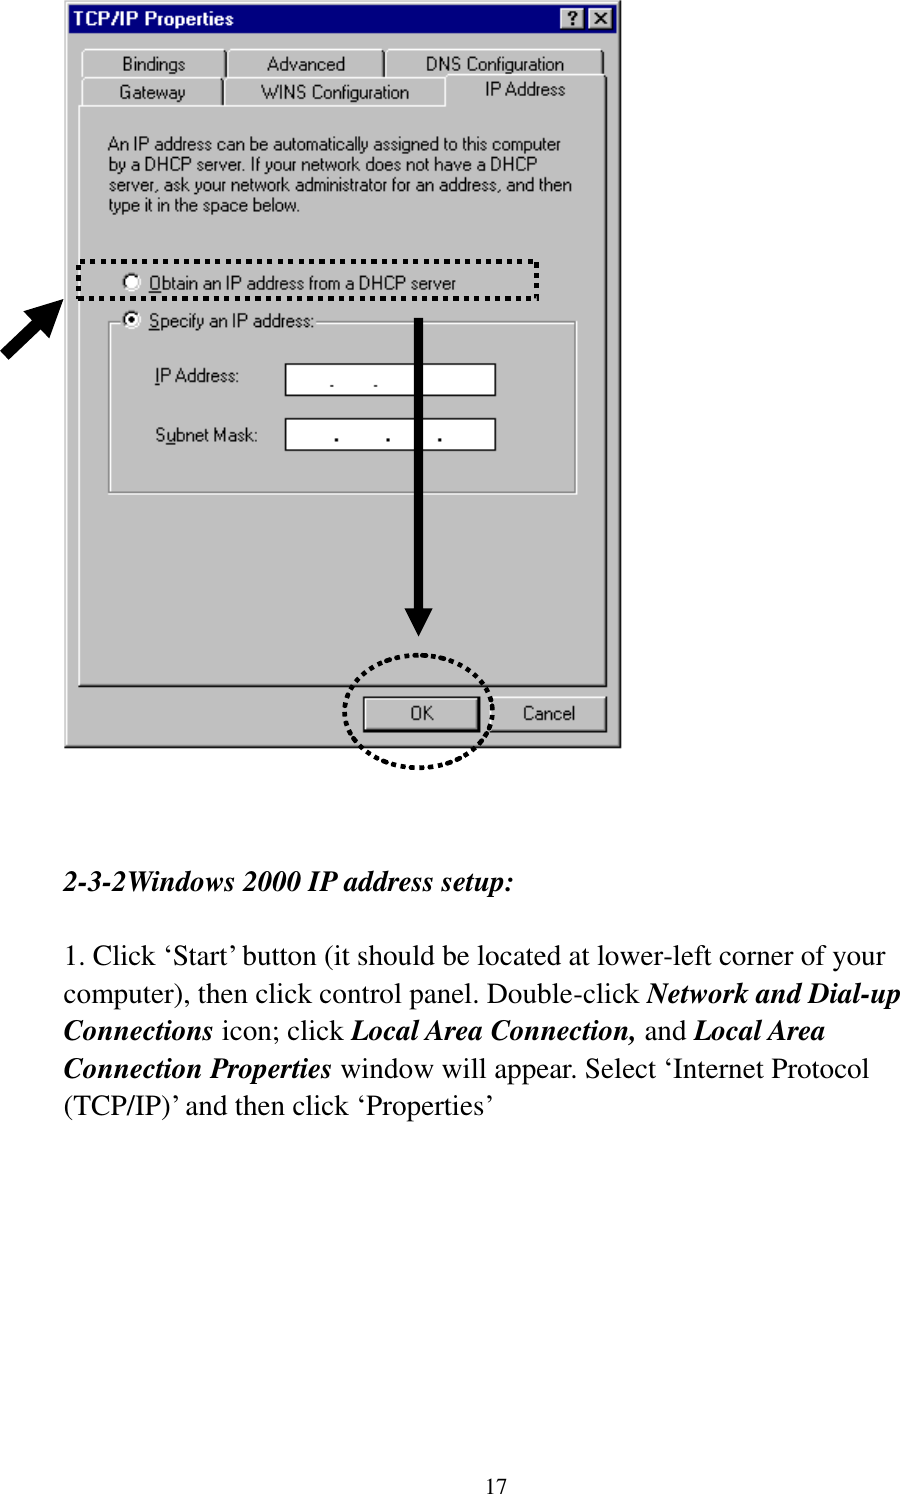 17     2-3-2Windows 2000 IP address setup:  1. Click „Start‟ button (it should be located at lower-left corner of your computer), then click control panel. Double-click Network and Dial-up Connections icon; click Local Area Connection, and Local Area Connection Properties window will appear. Select „Internet Protocol (TCP/IP)‟ and then click „Properties‟    